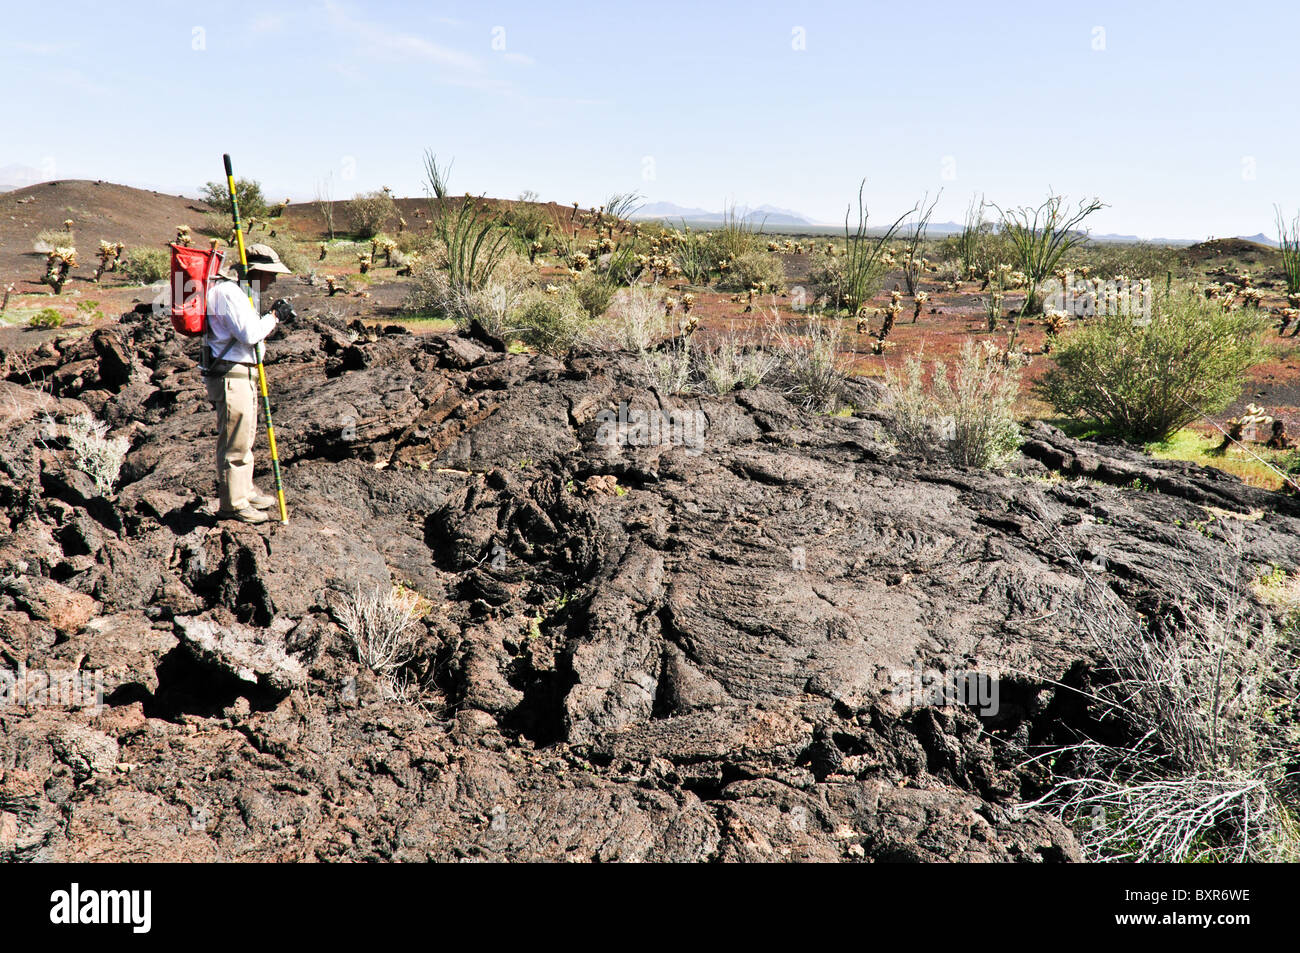 Geologist viewing pahoehoe lava flow near Tecolote cinder cone, El Pinacate Biosphere Reserve, Sonora, Mexico Stock Photo